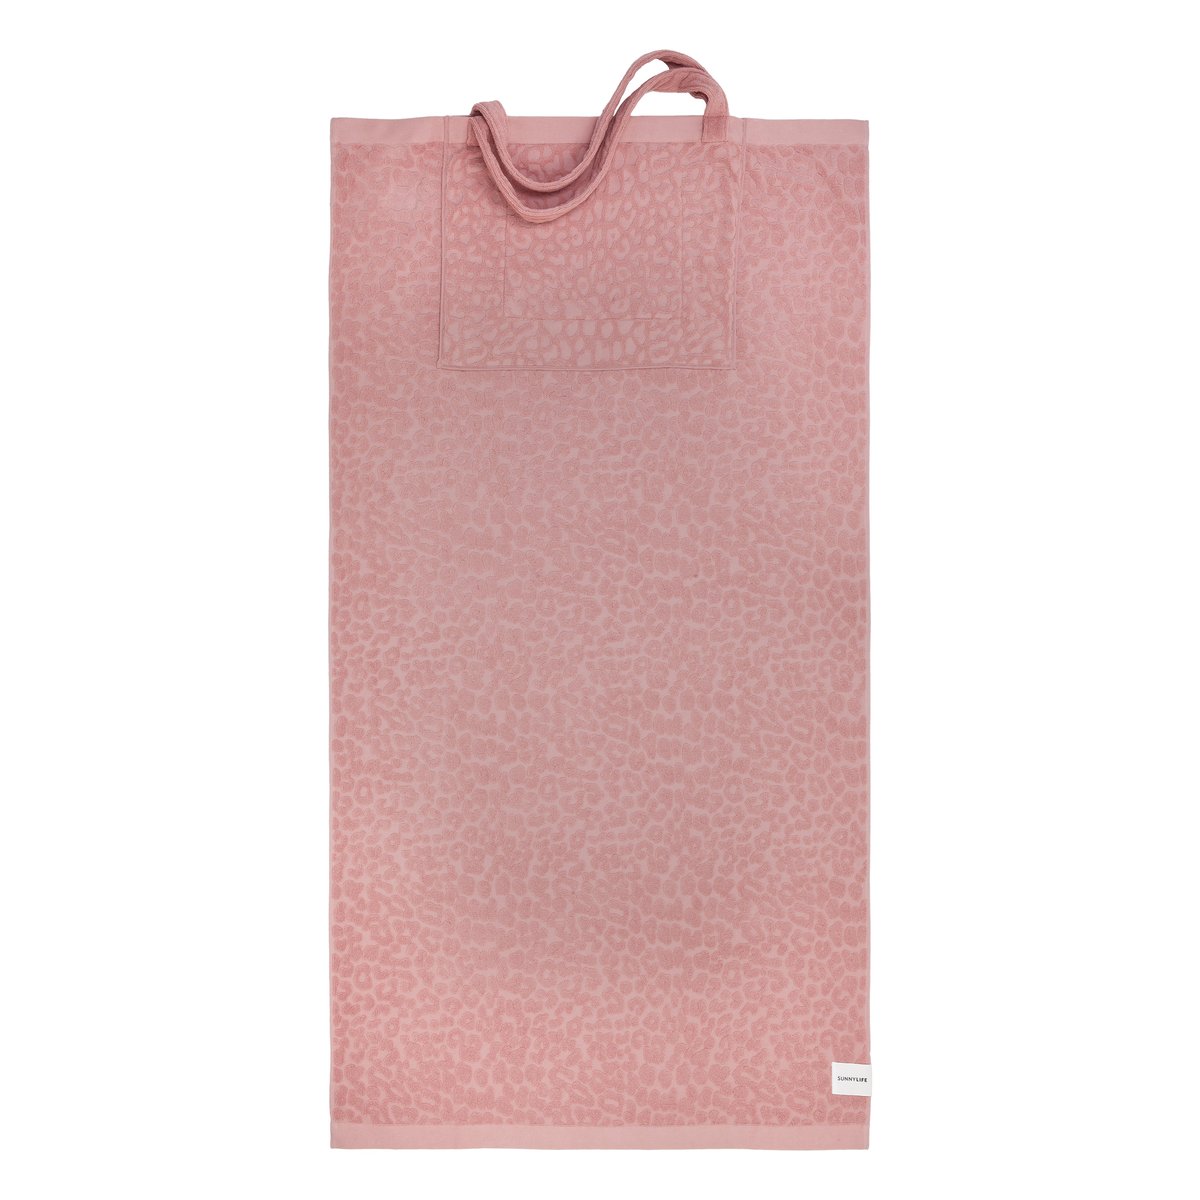 TERRY TOWEL 2 IN 1 TOTE - BLUSH